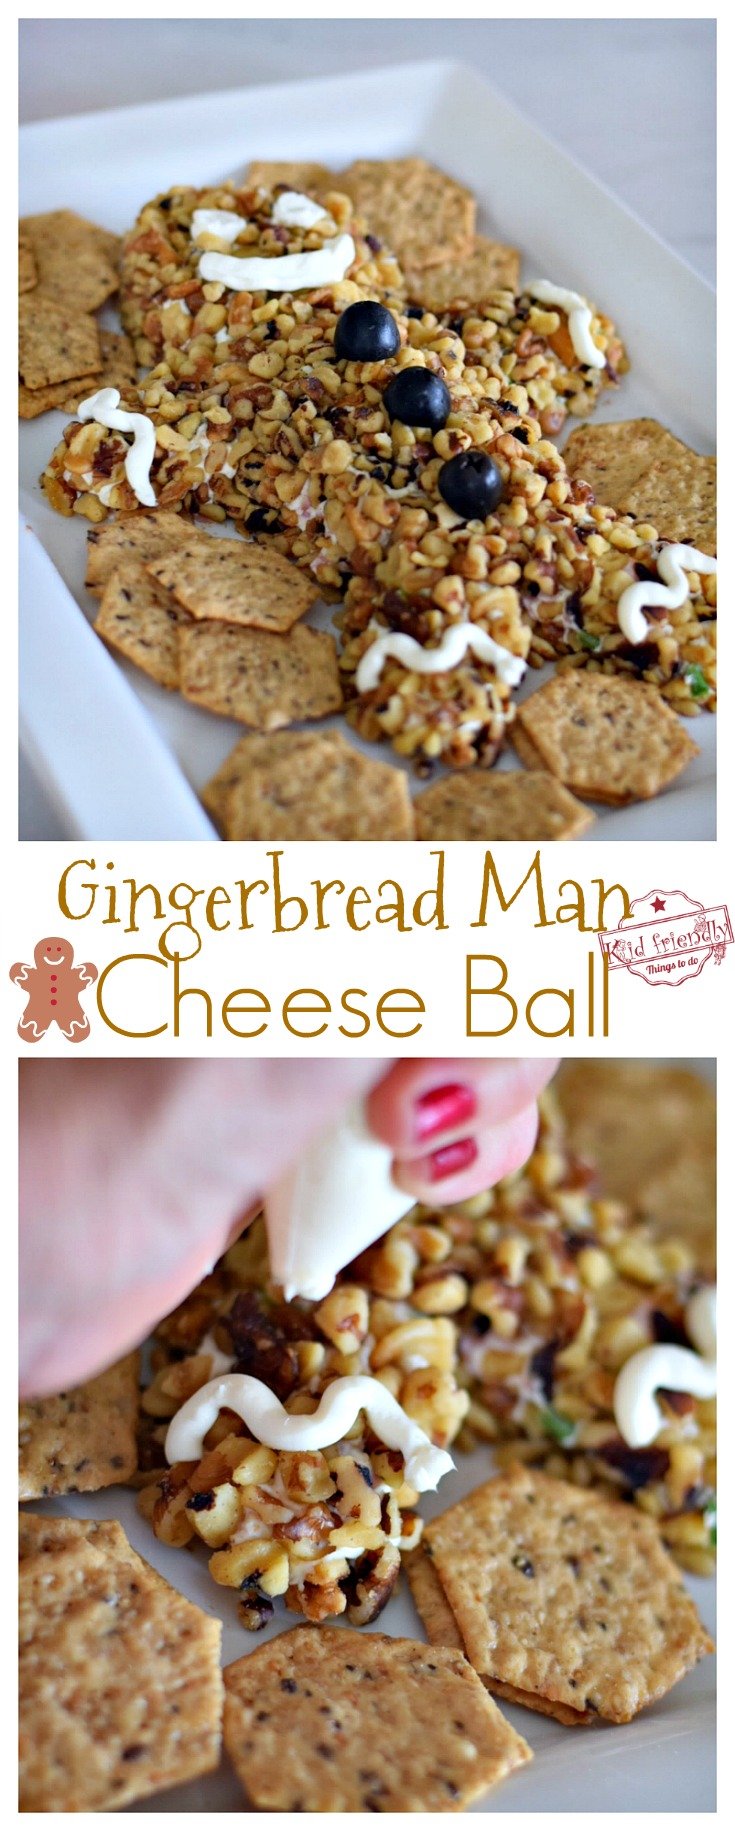 Fun and Easy Gingerbread Christmas Cheese Ball Recipe and Tutorial - Simple to make. Perfect holiday cheese ball with green onions and ham for your holiday parties! www.kidfriendlythingstodo.com 